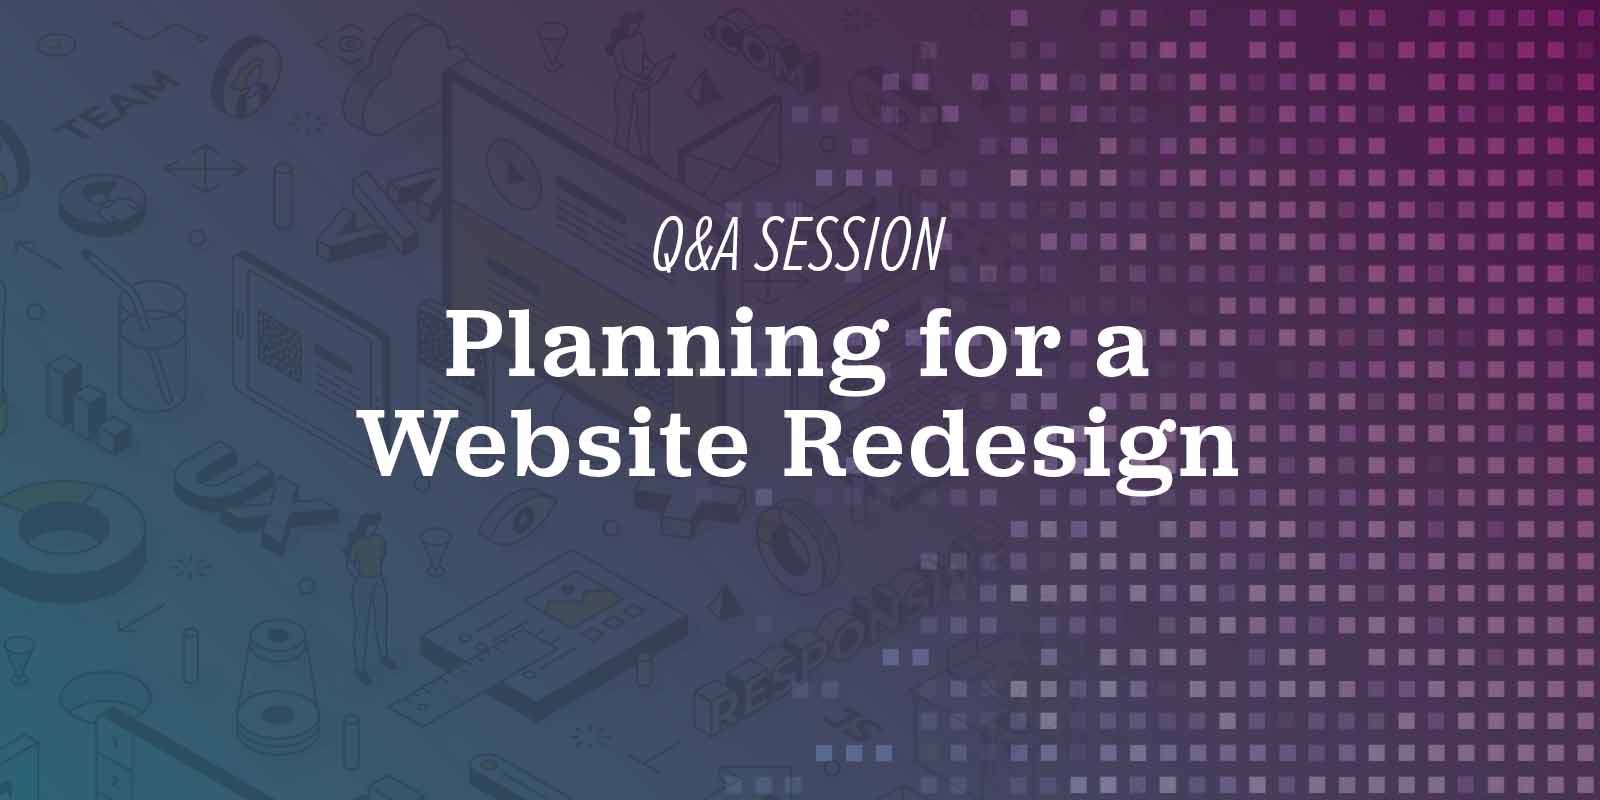 Website Redesign Q&A Session